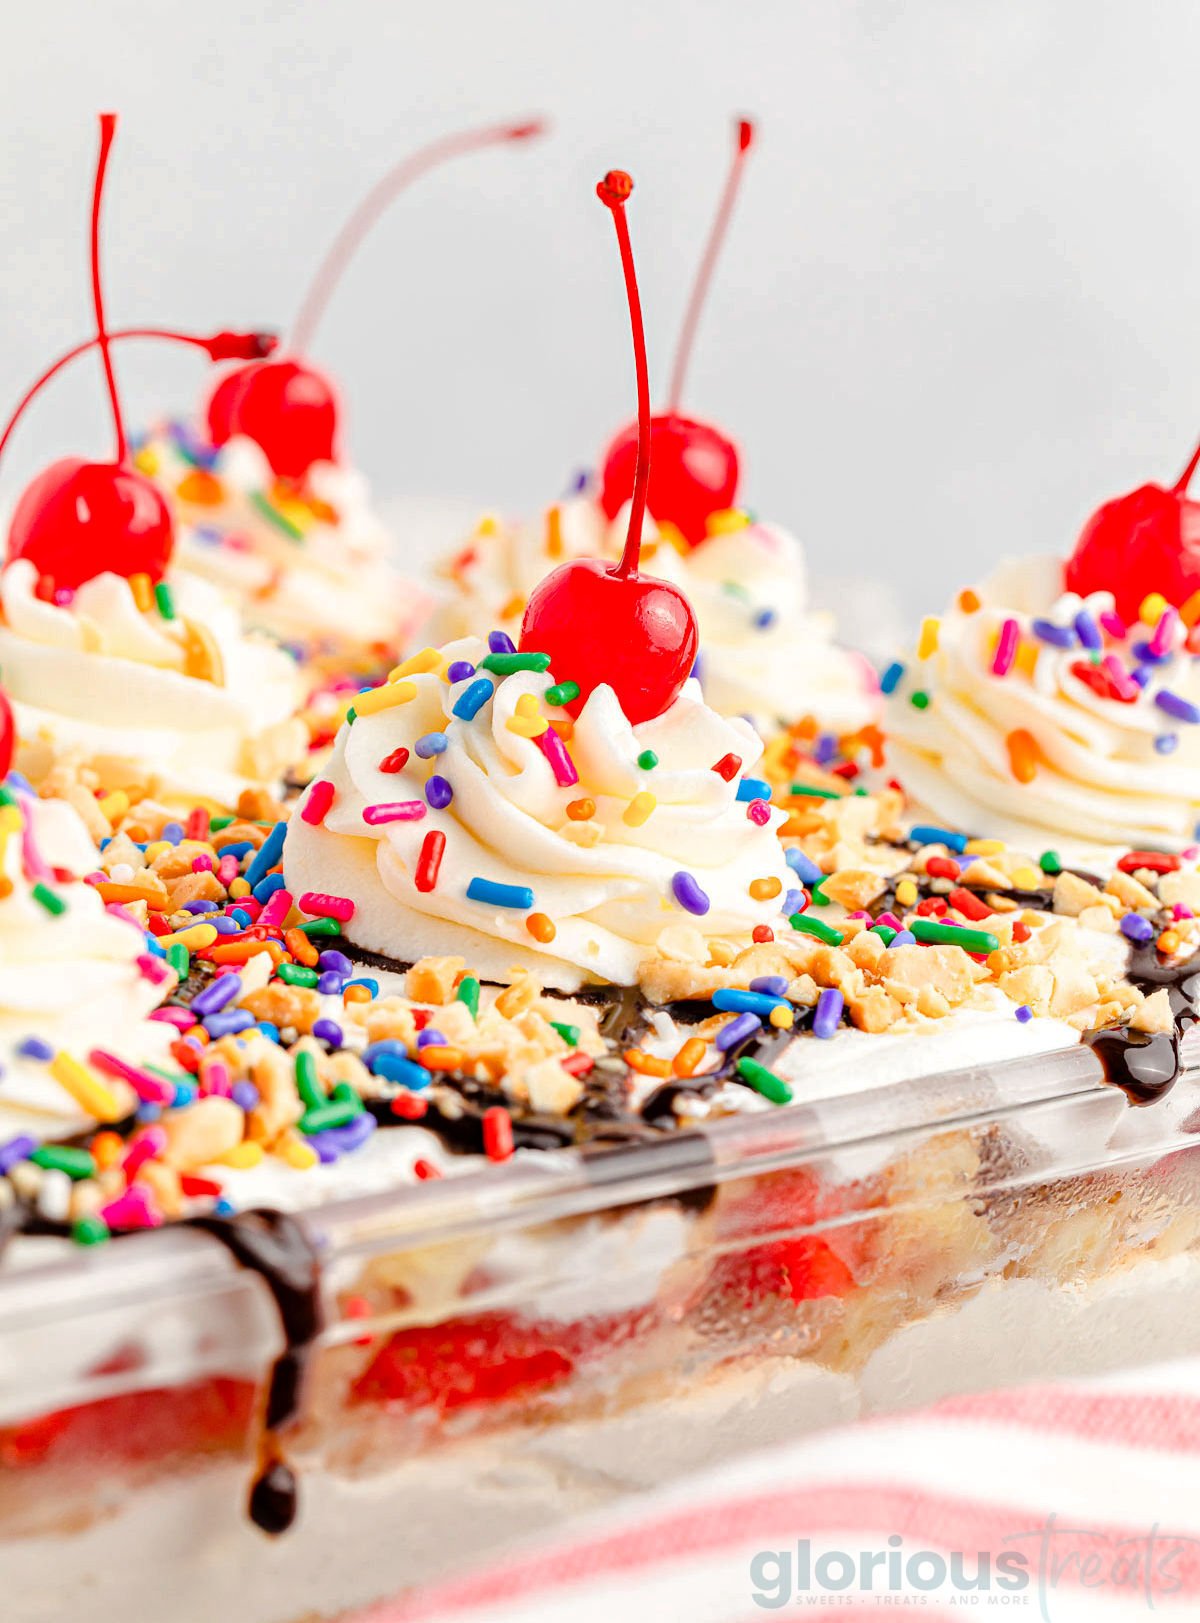 banana split dessert in a clear glass casserole dish. all the classic banana split toppings are on top of the dessert.